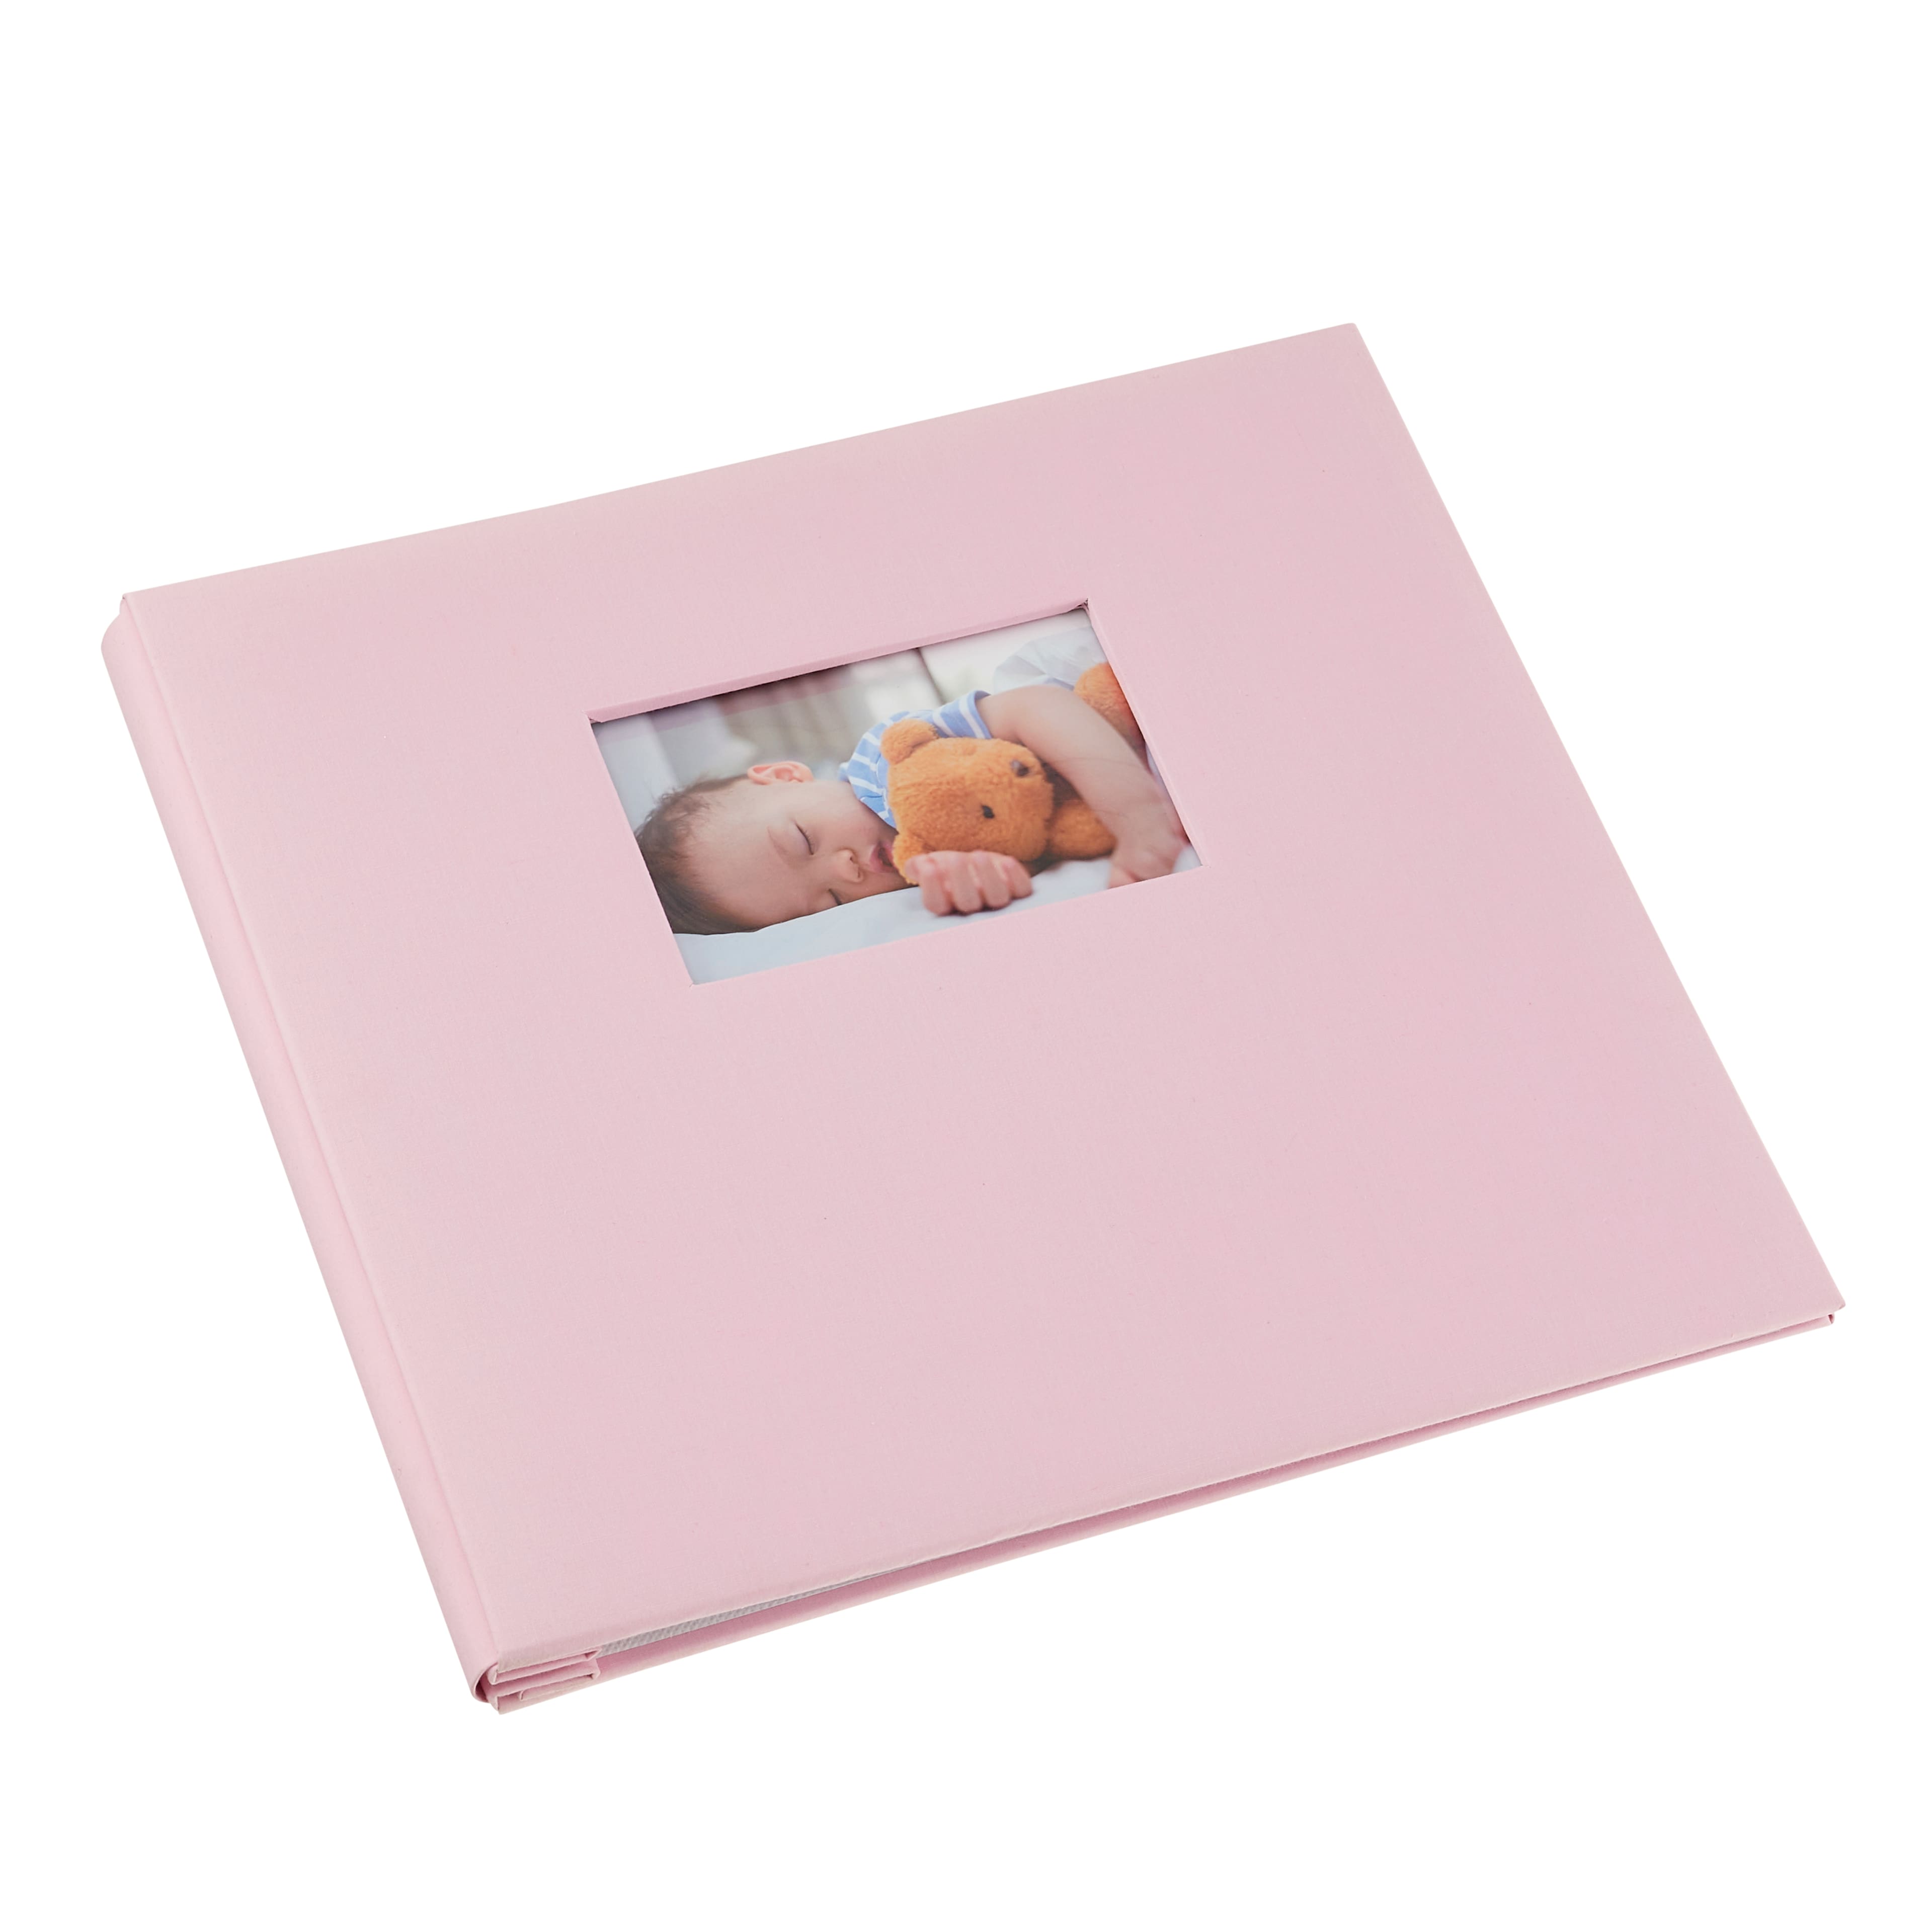 12" x 12" Cloth Scrapbook Album by Recollections®